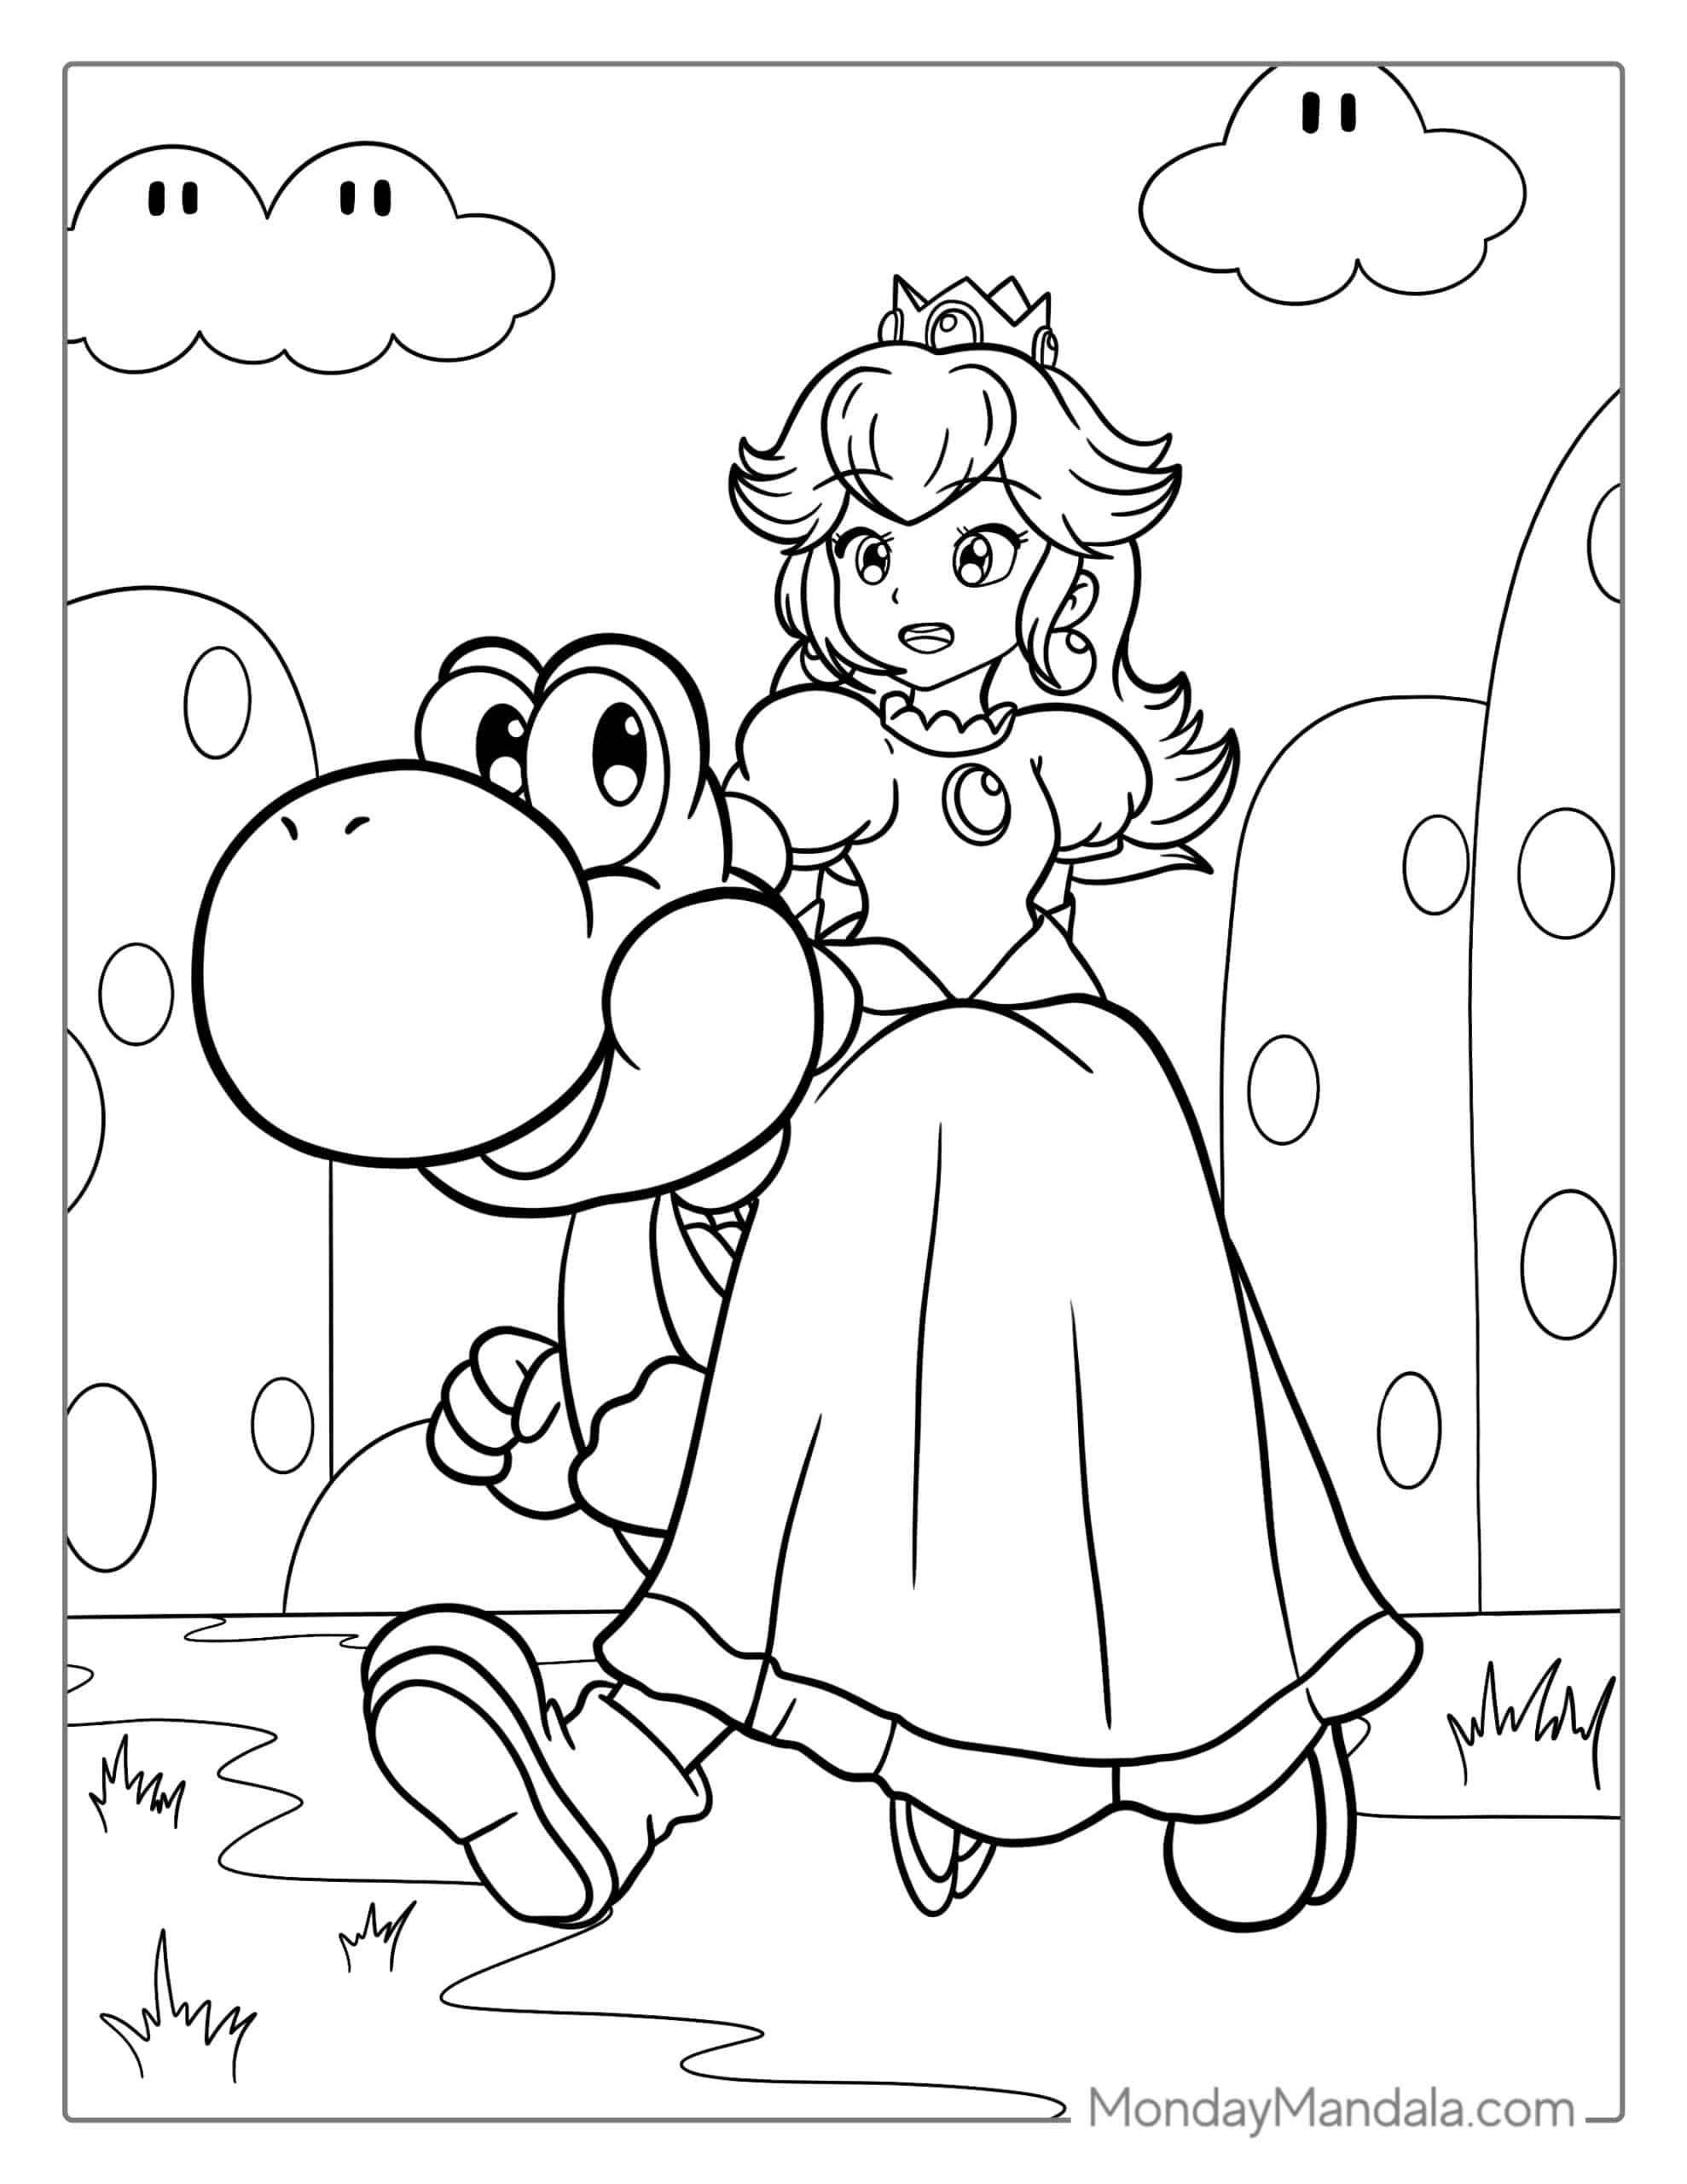 Princess peach coloring pages free pdf printables coloring pages witch coloring pages cute coloring pages